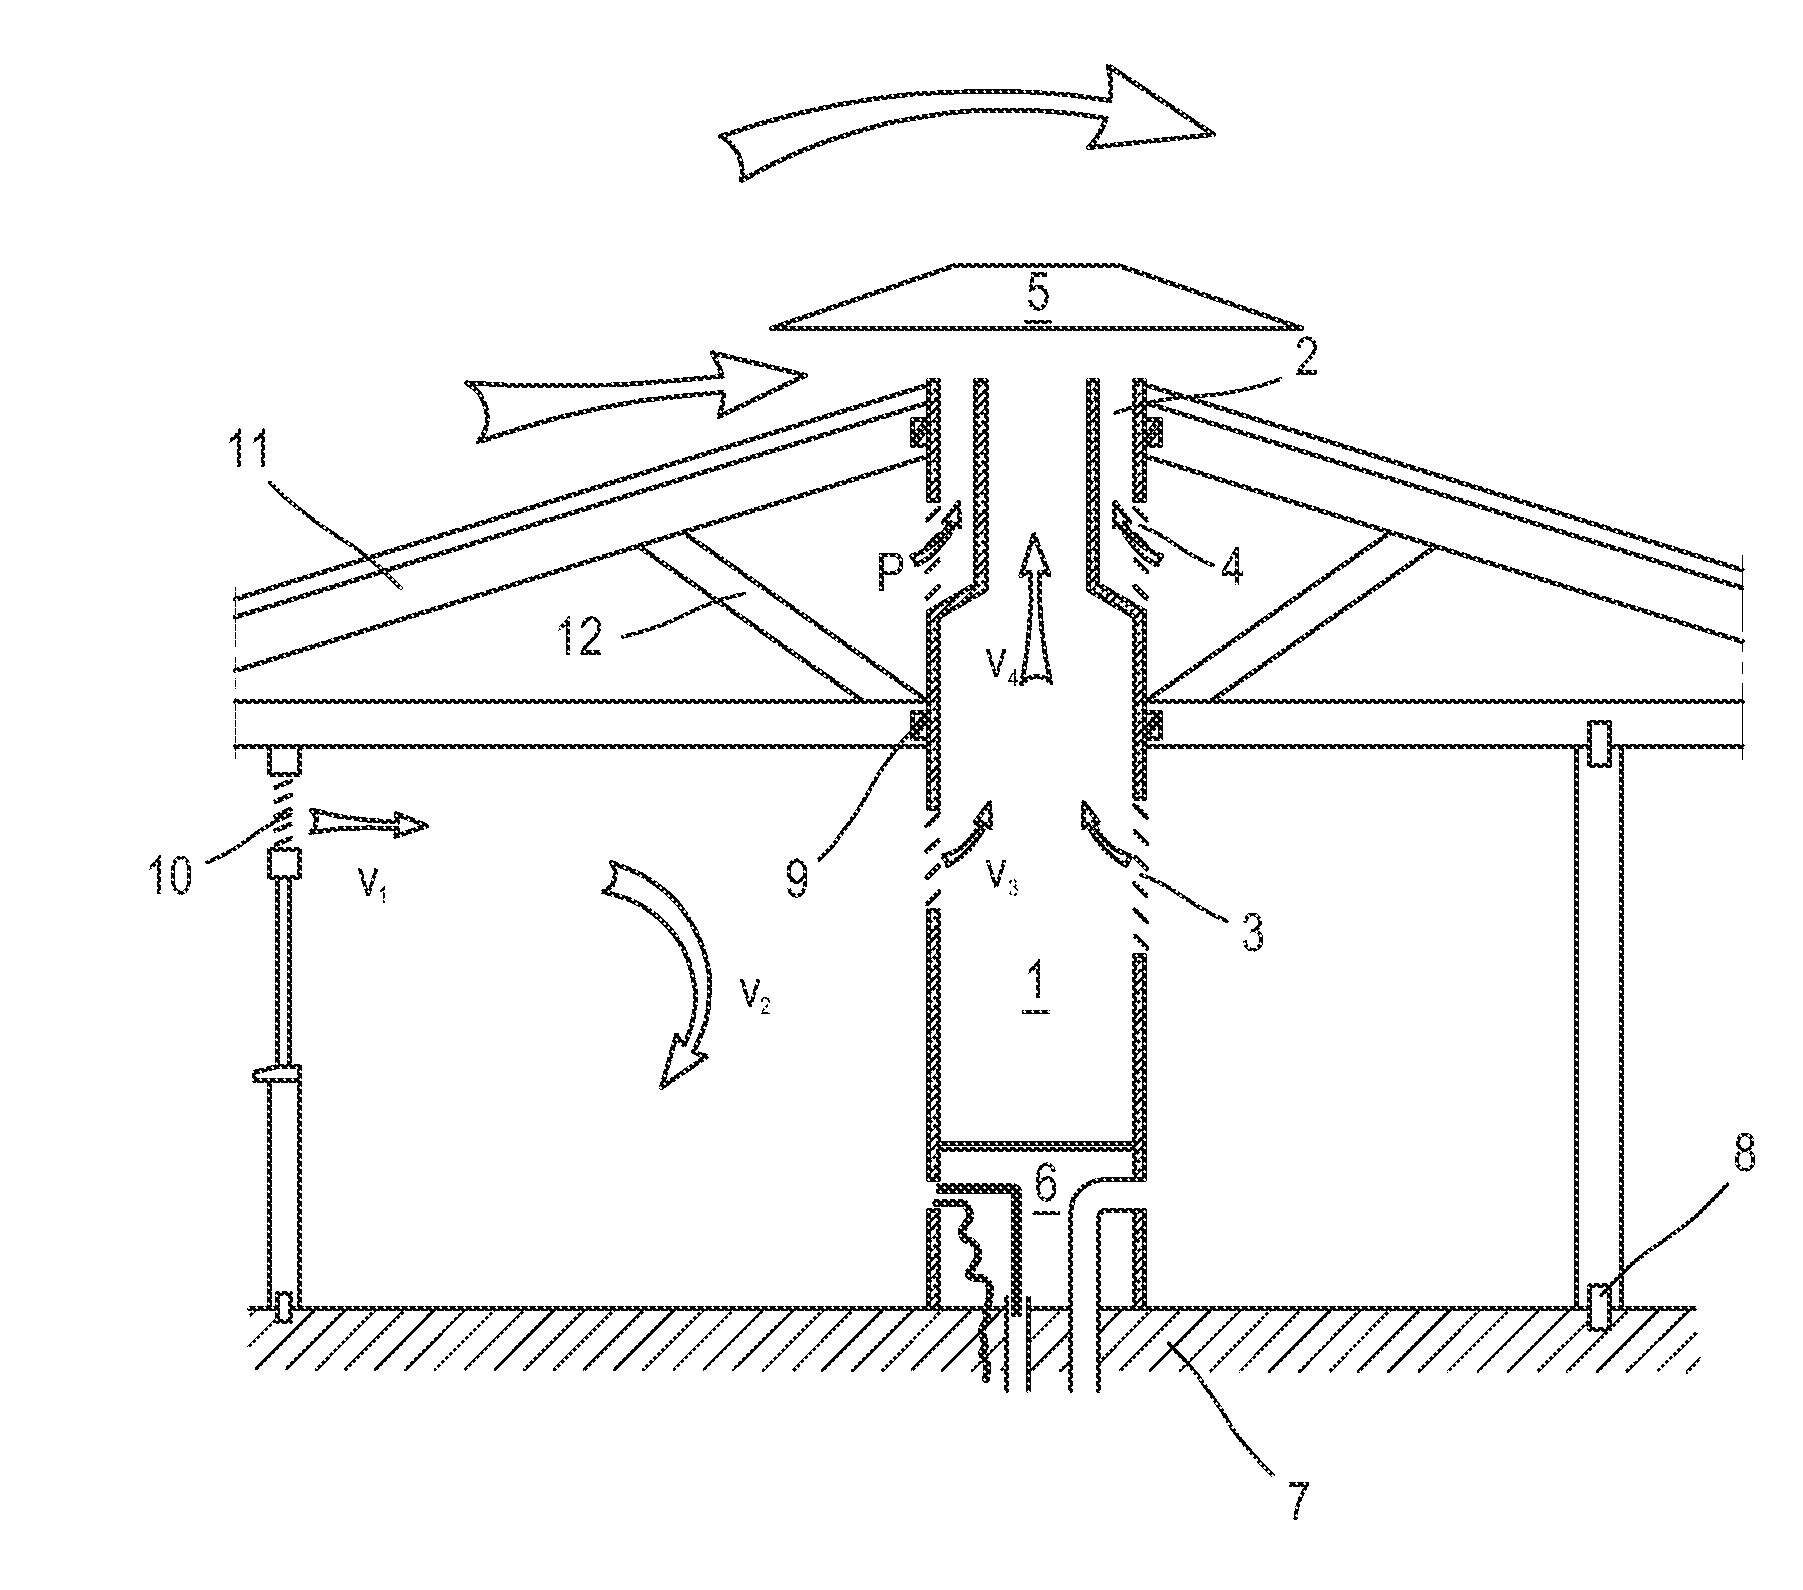 Tropical chimney, namely ventilation well with hurricane-resistant function, and associated building and kit